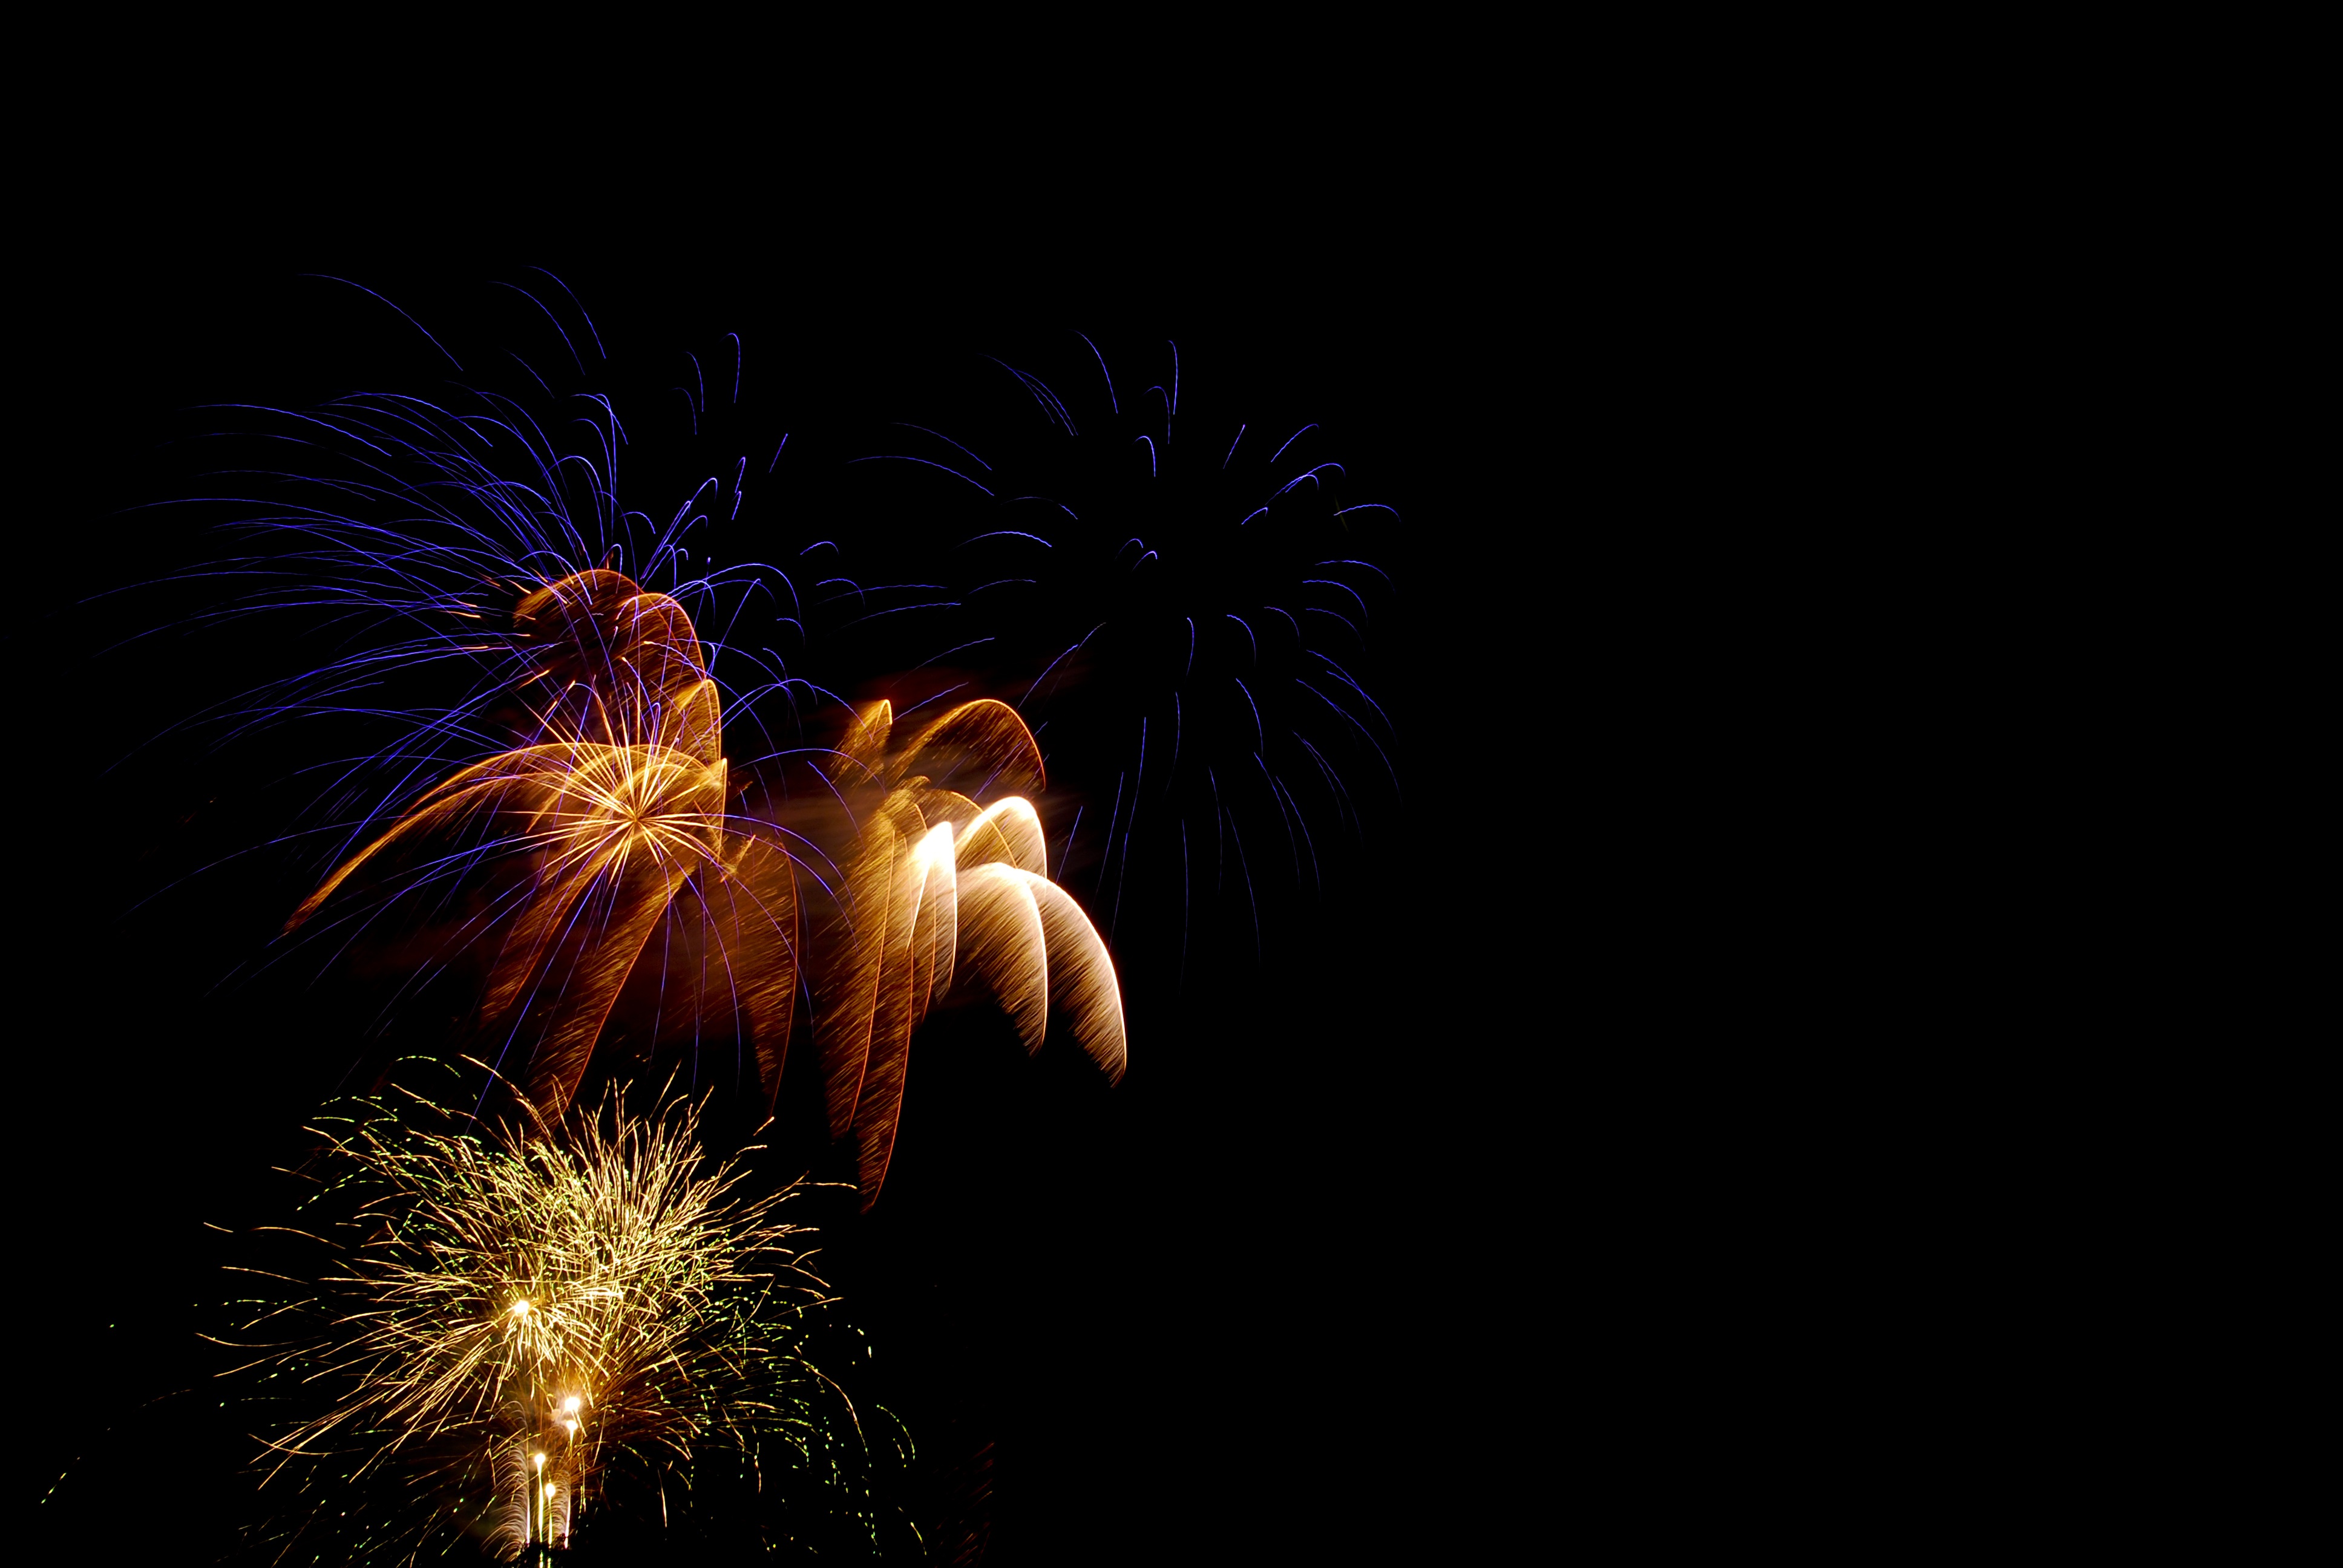 Fireworks in night, Animal, Celebration, Common creative images, Fireworks, HQ Photo